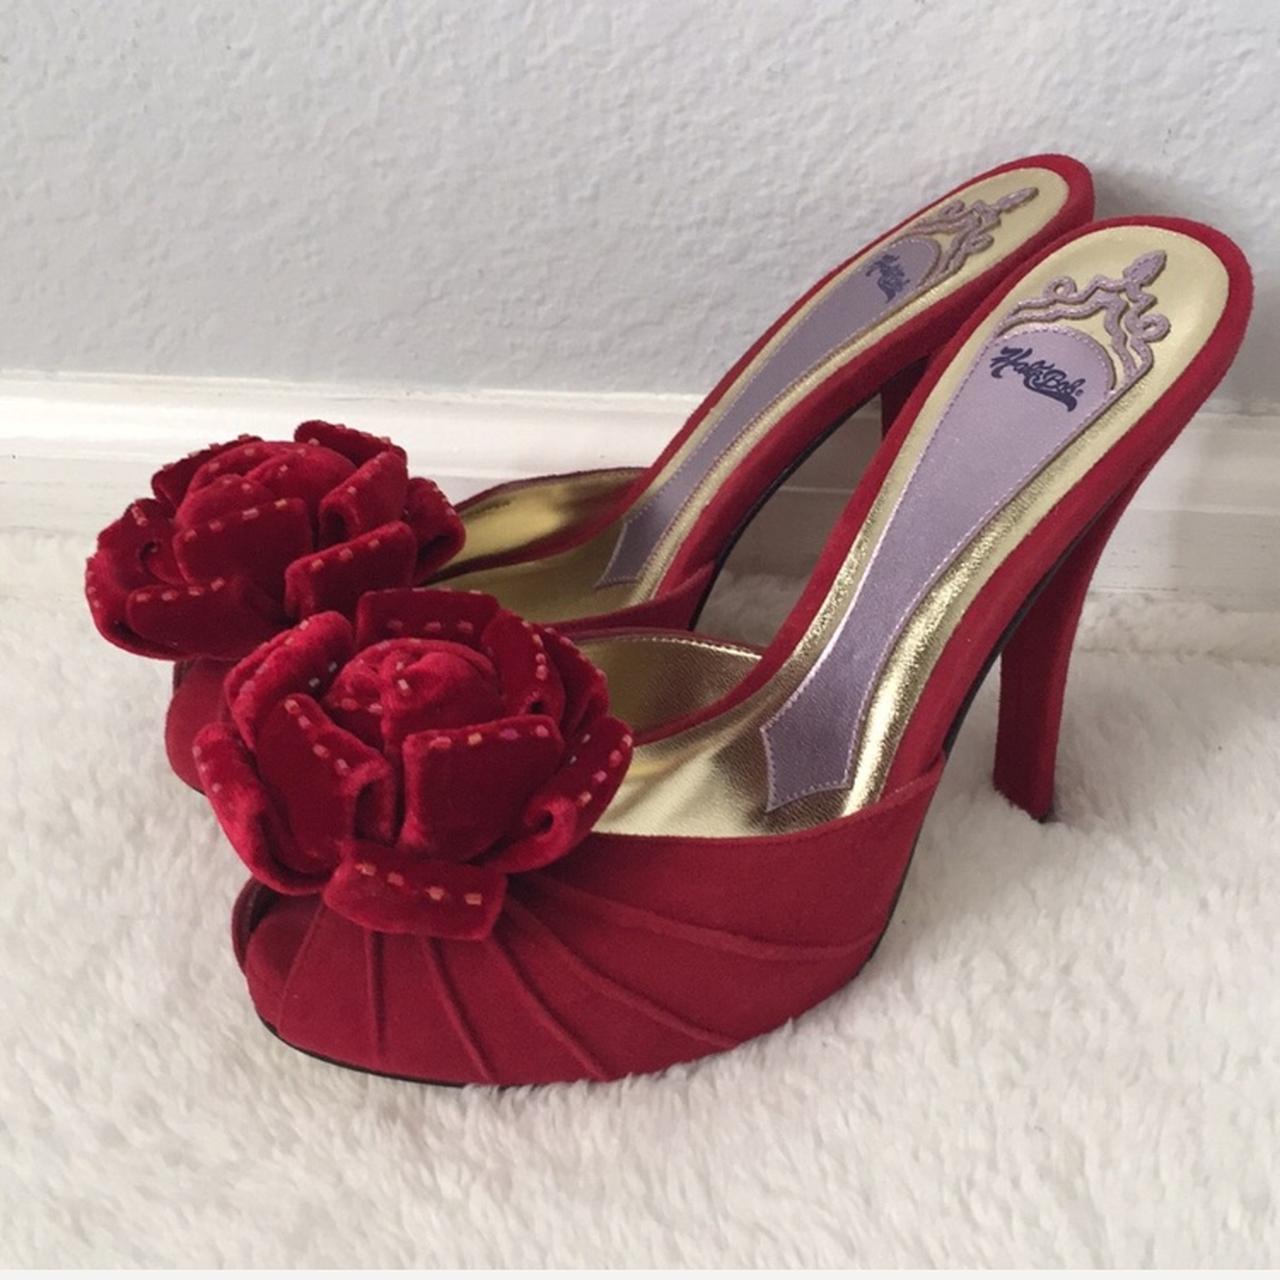 Hale Bob Women's Red and Burgundy Courts | Depop